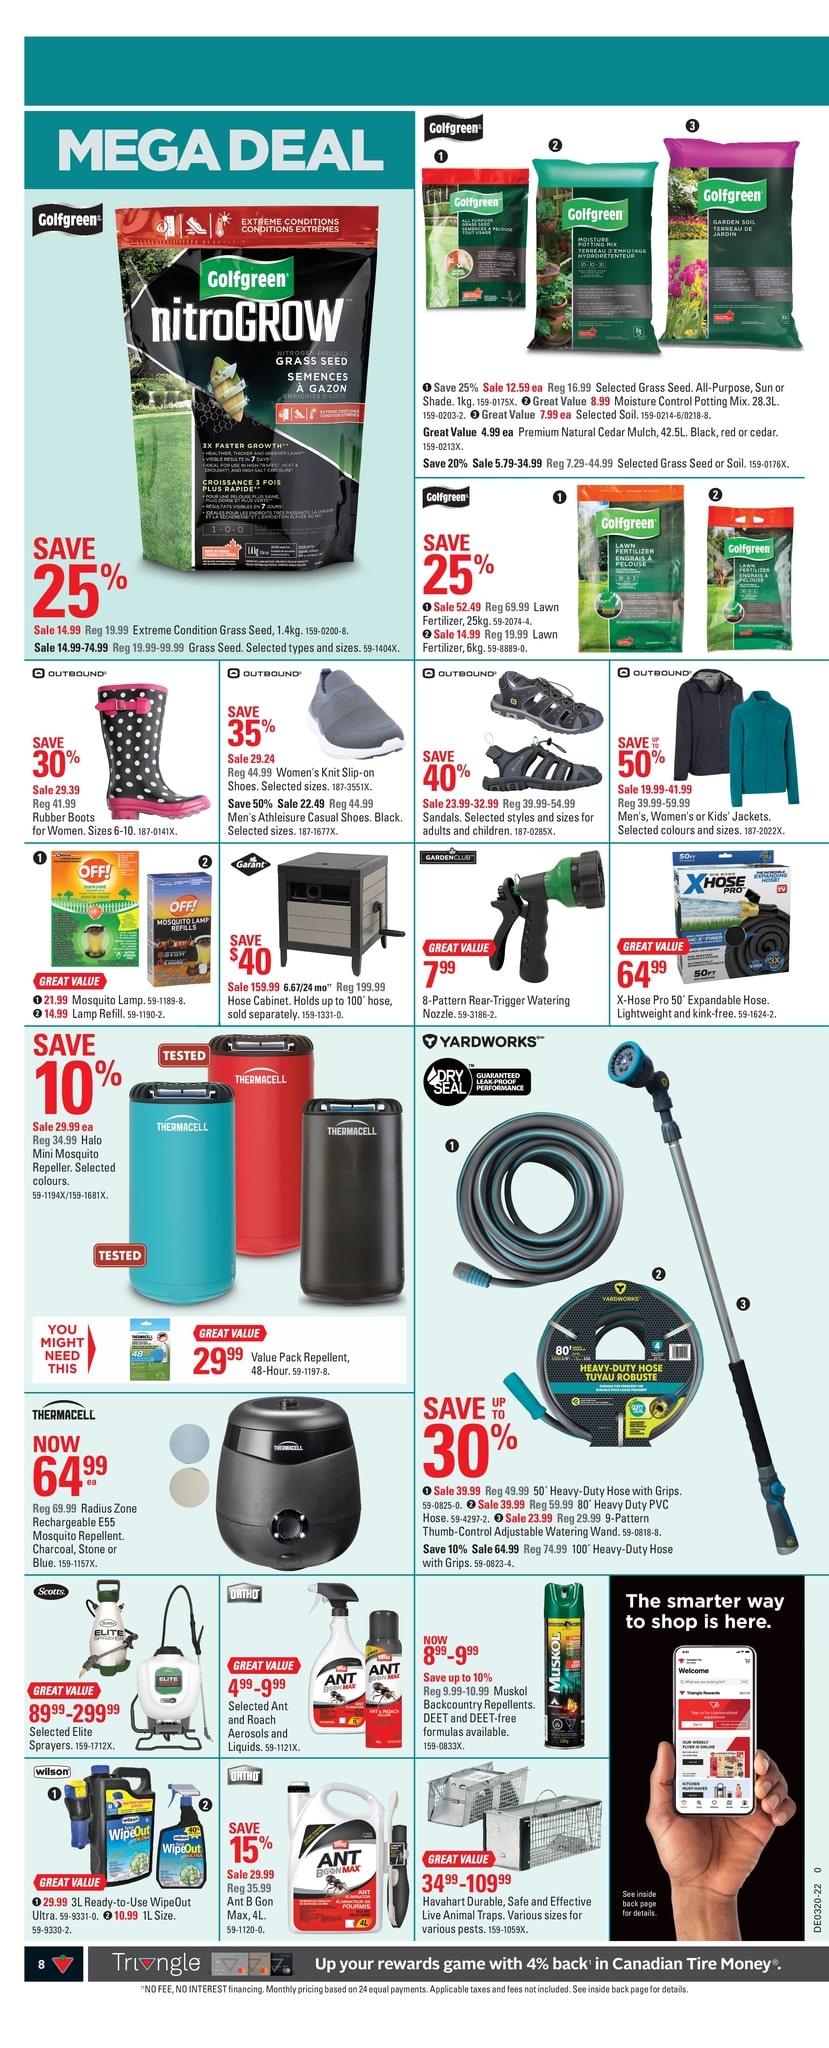 Canadian Tire - Weekly Flyer Specials - Page 8